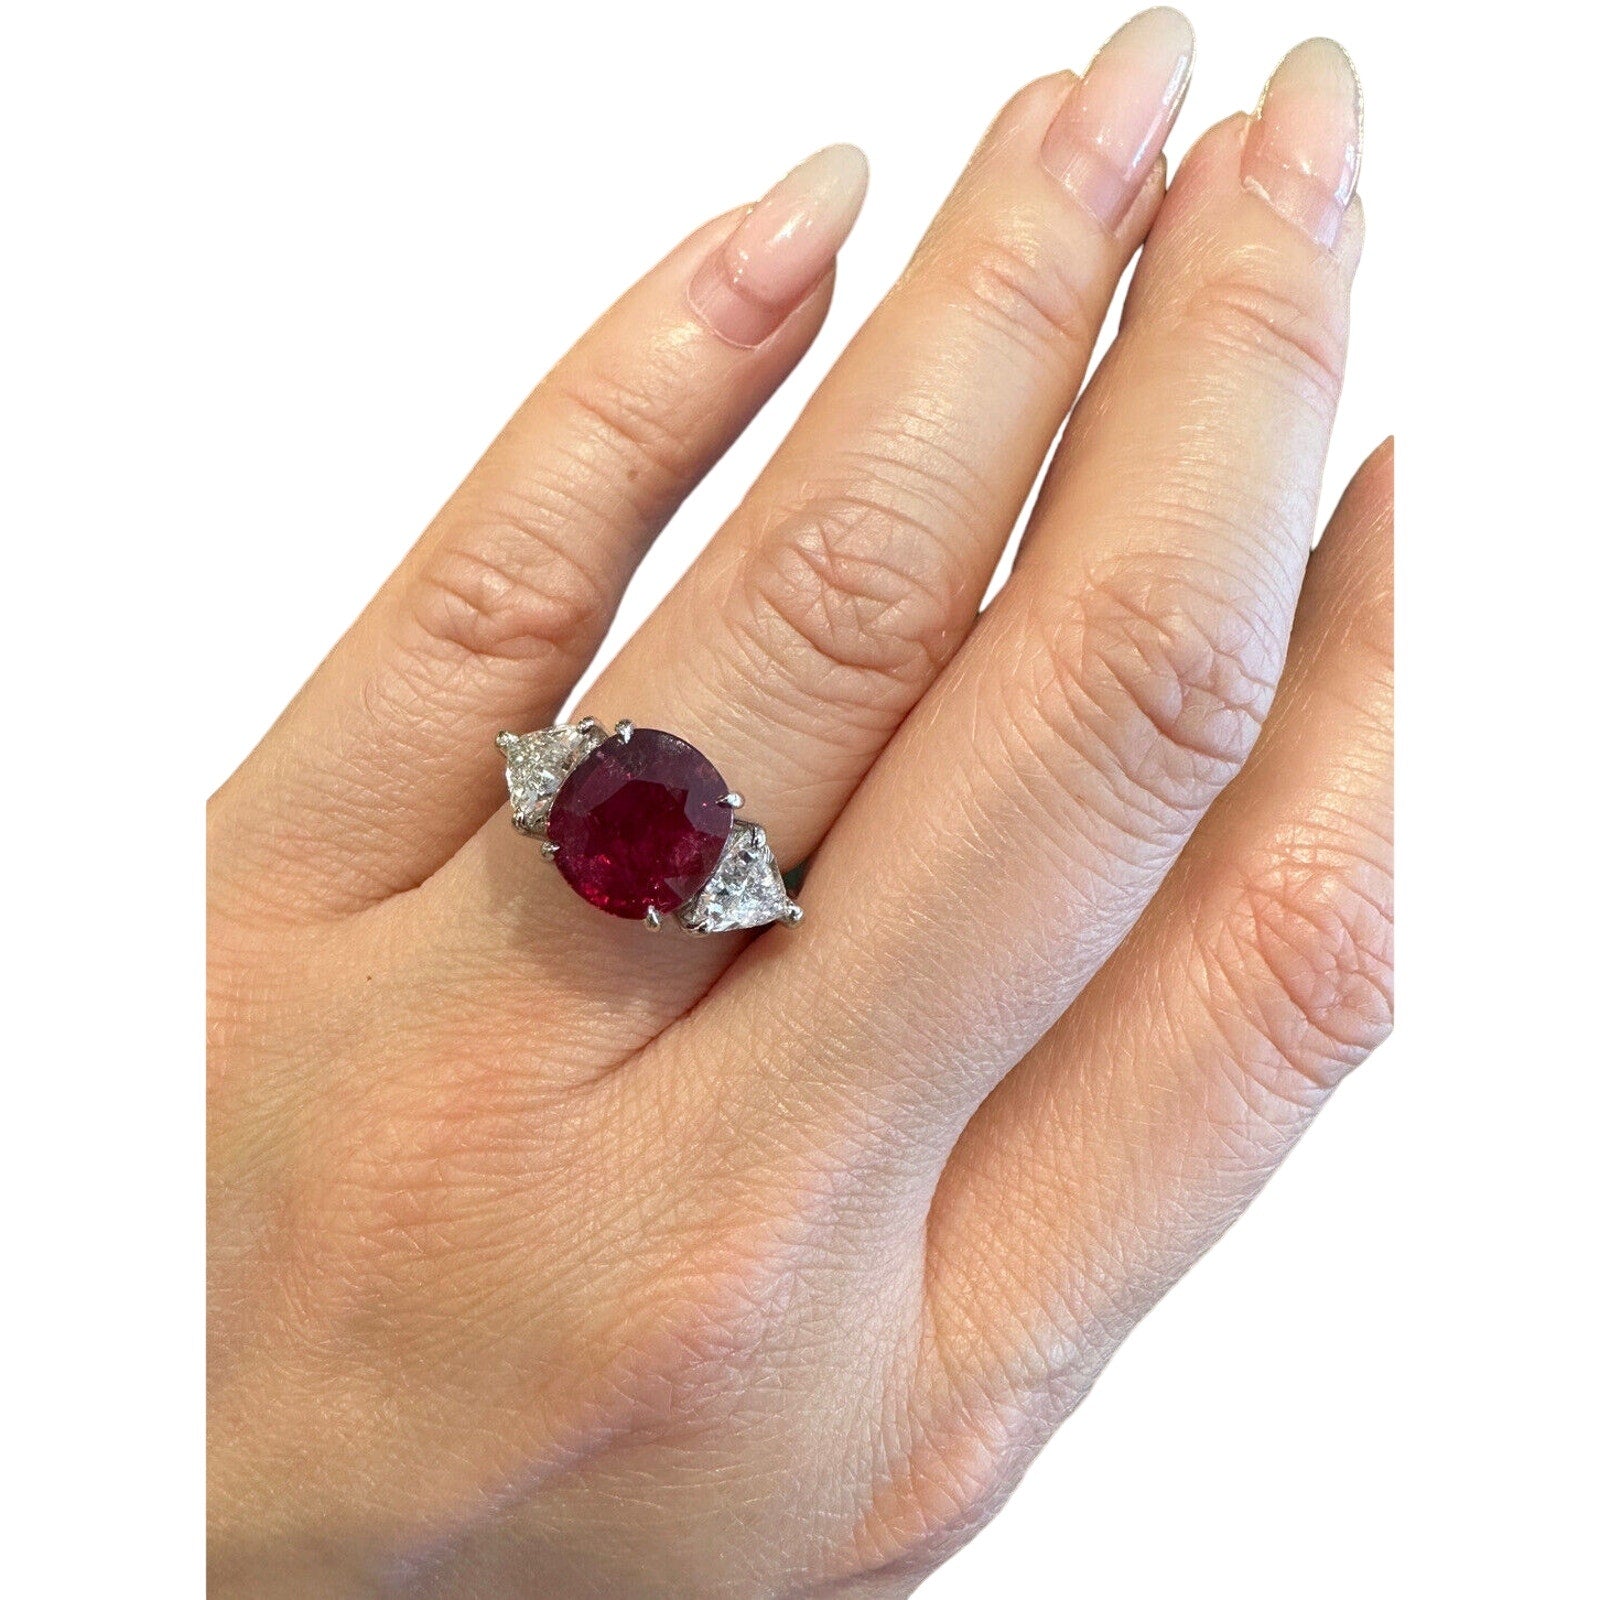 GRS Unheated 4.04 ct Cushion Cut Ruby Ring in Platinum with Diamonds - HM2518SV